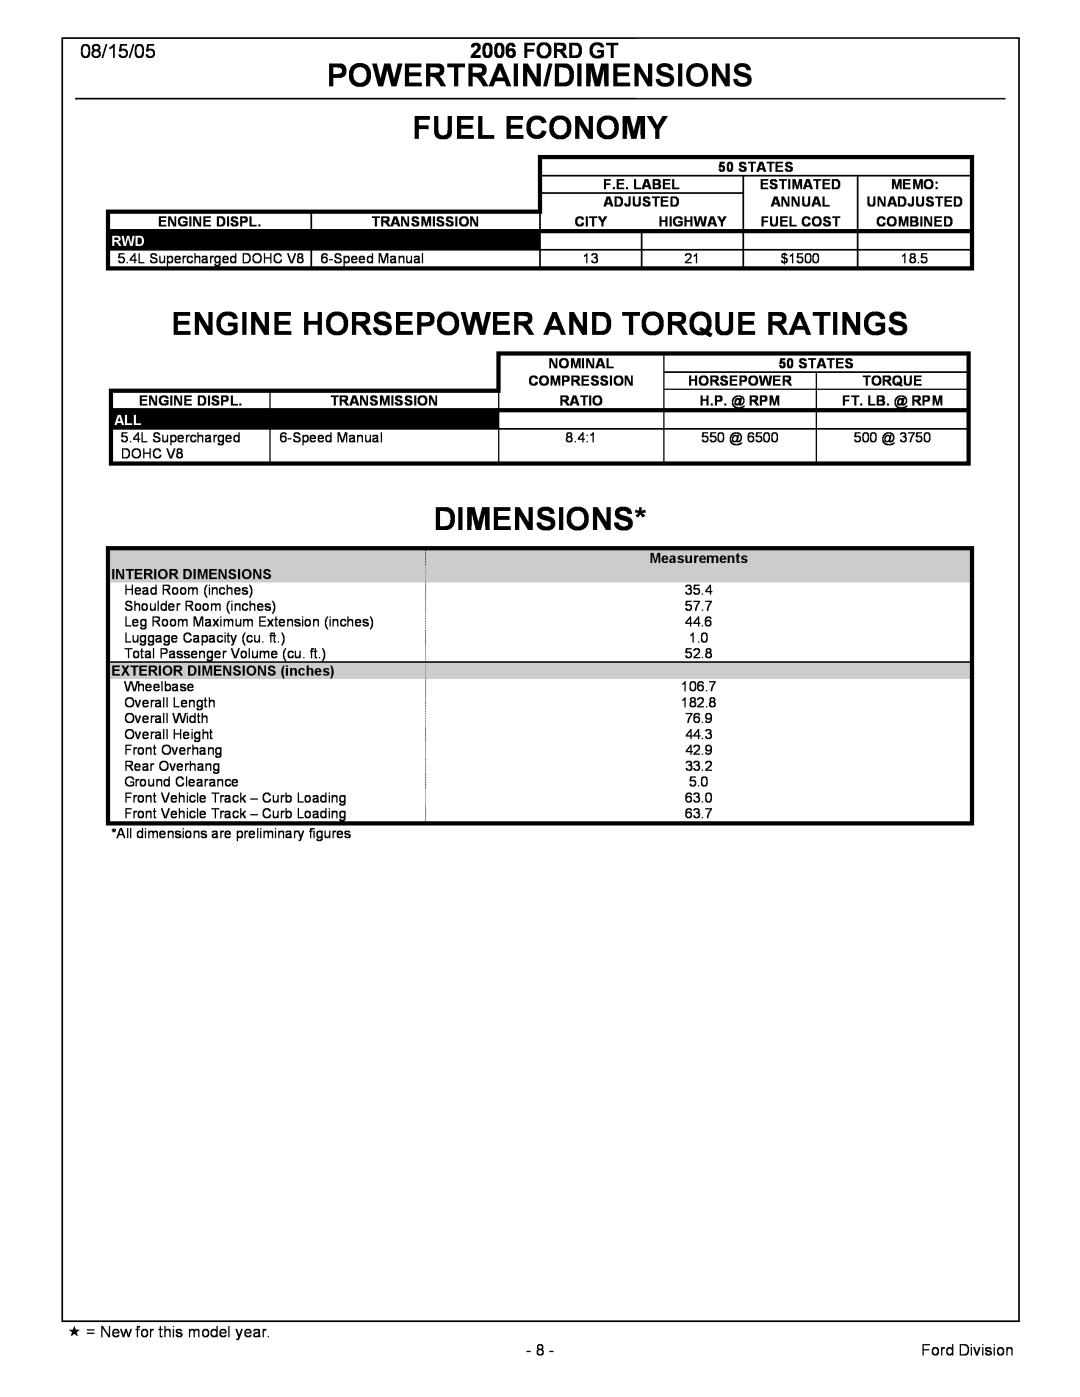 Ford 2006MY manual Powertrain/Dimensions, Fuel Economy, Engine Horsepower And Torque Ratings, Ford Gt, 08/15/05 